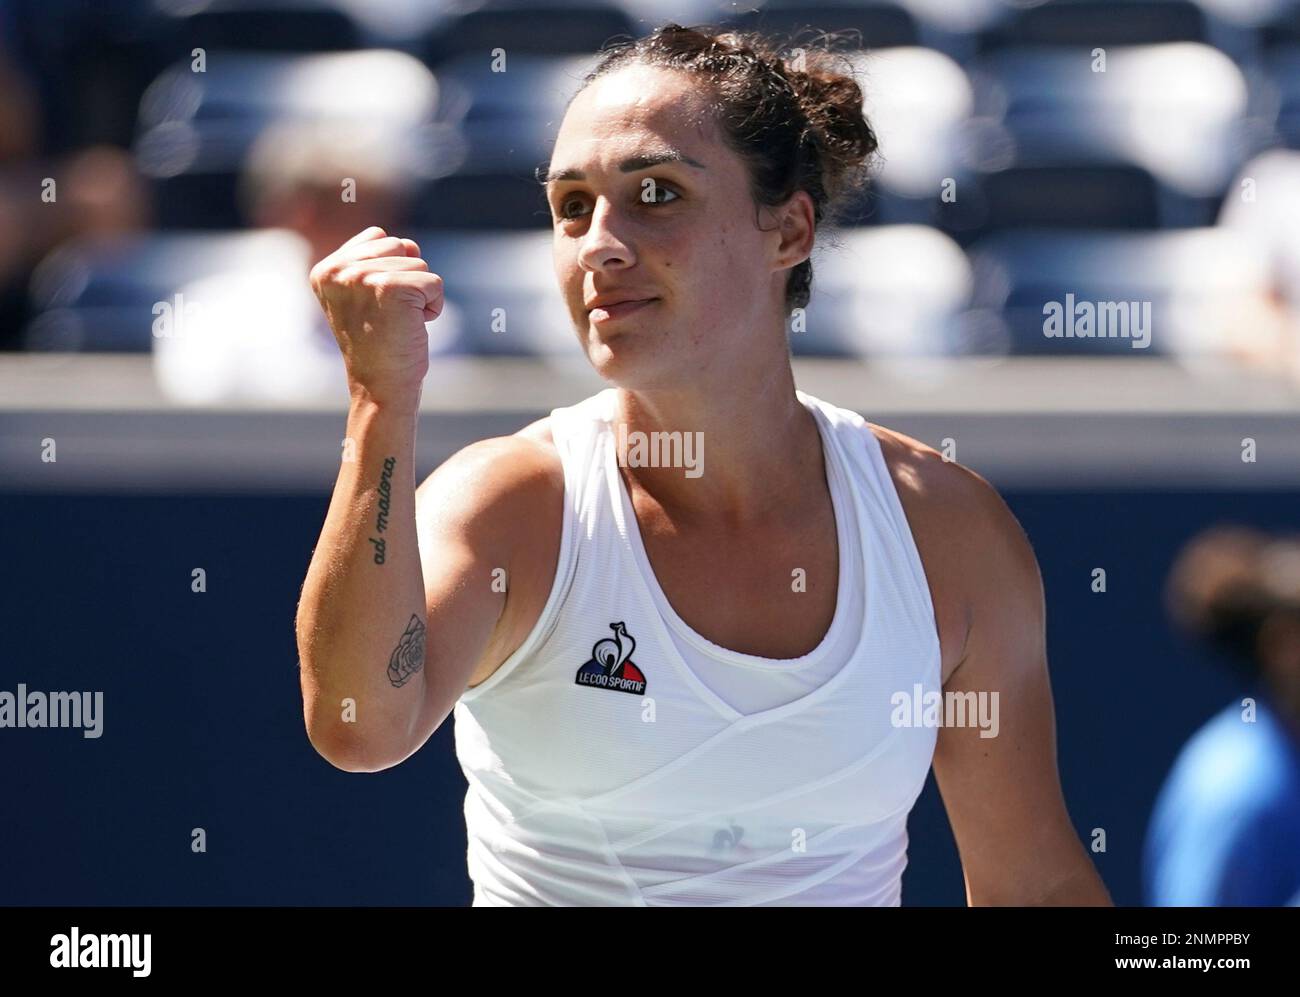 Martina Trevisan reacts to a point during a Women's Singles match at the  2021 US Open, Thursday, Sep. 2, 2021 in Flushing, NY. (Manuela Davies/USTA  via AP Stock Photo - Alamy